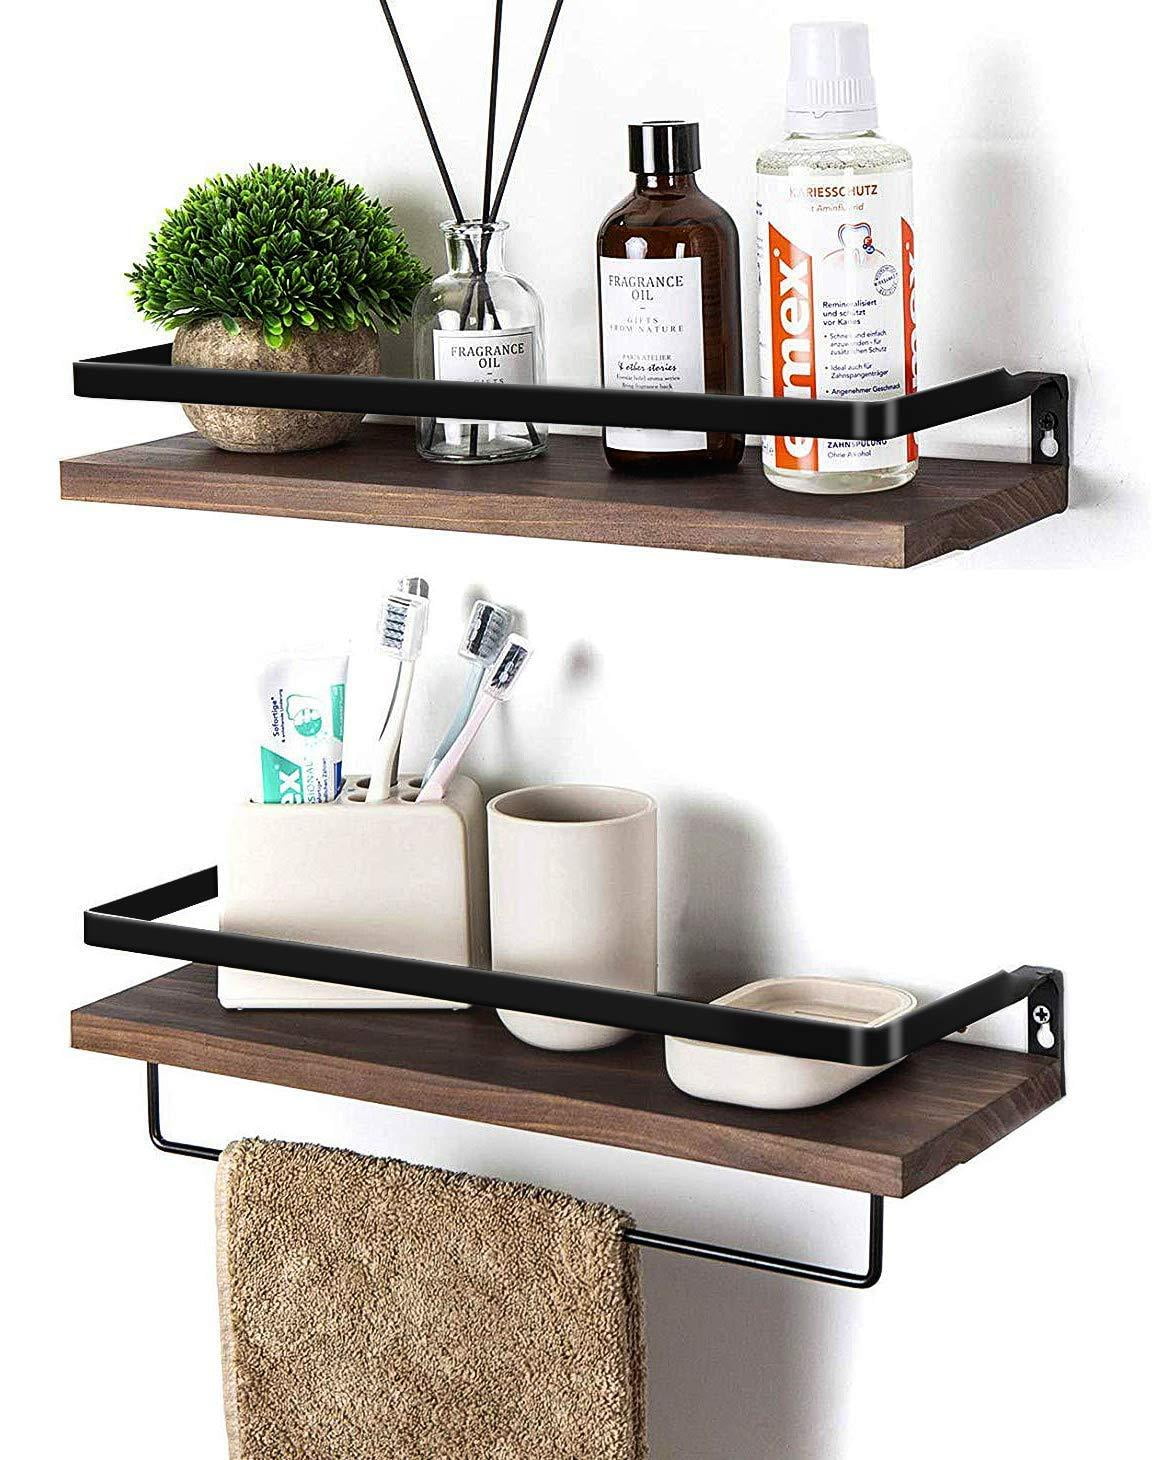 Details about   Wall Mounted Shelf Storage Rustic Wood Kitchen Living Room Bedroom Rack w/Hooks 